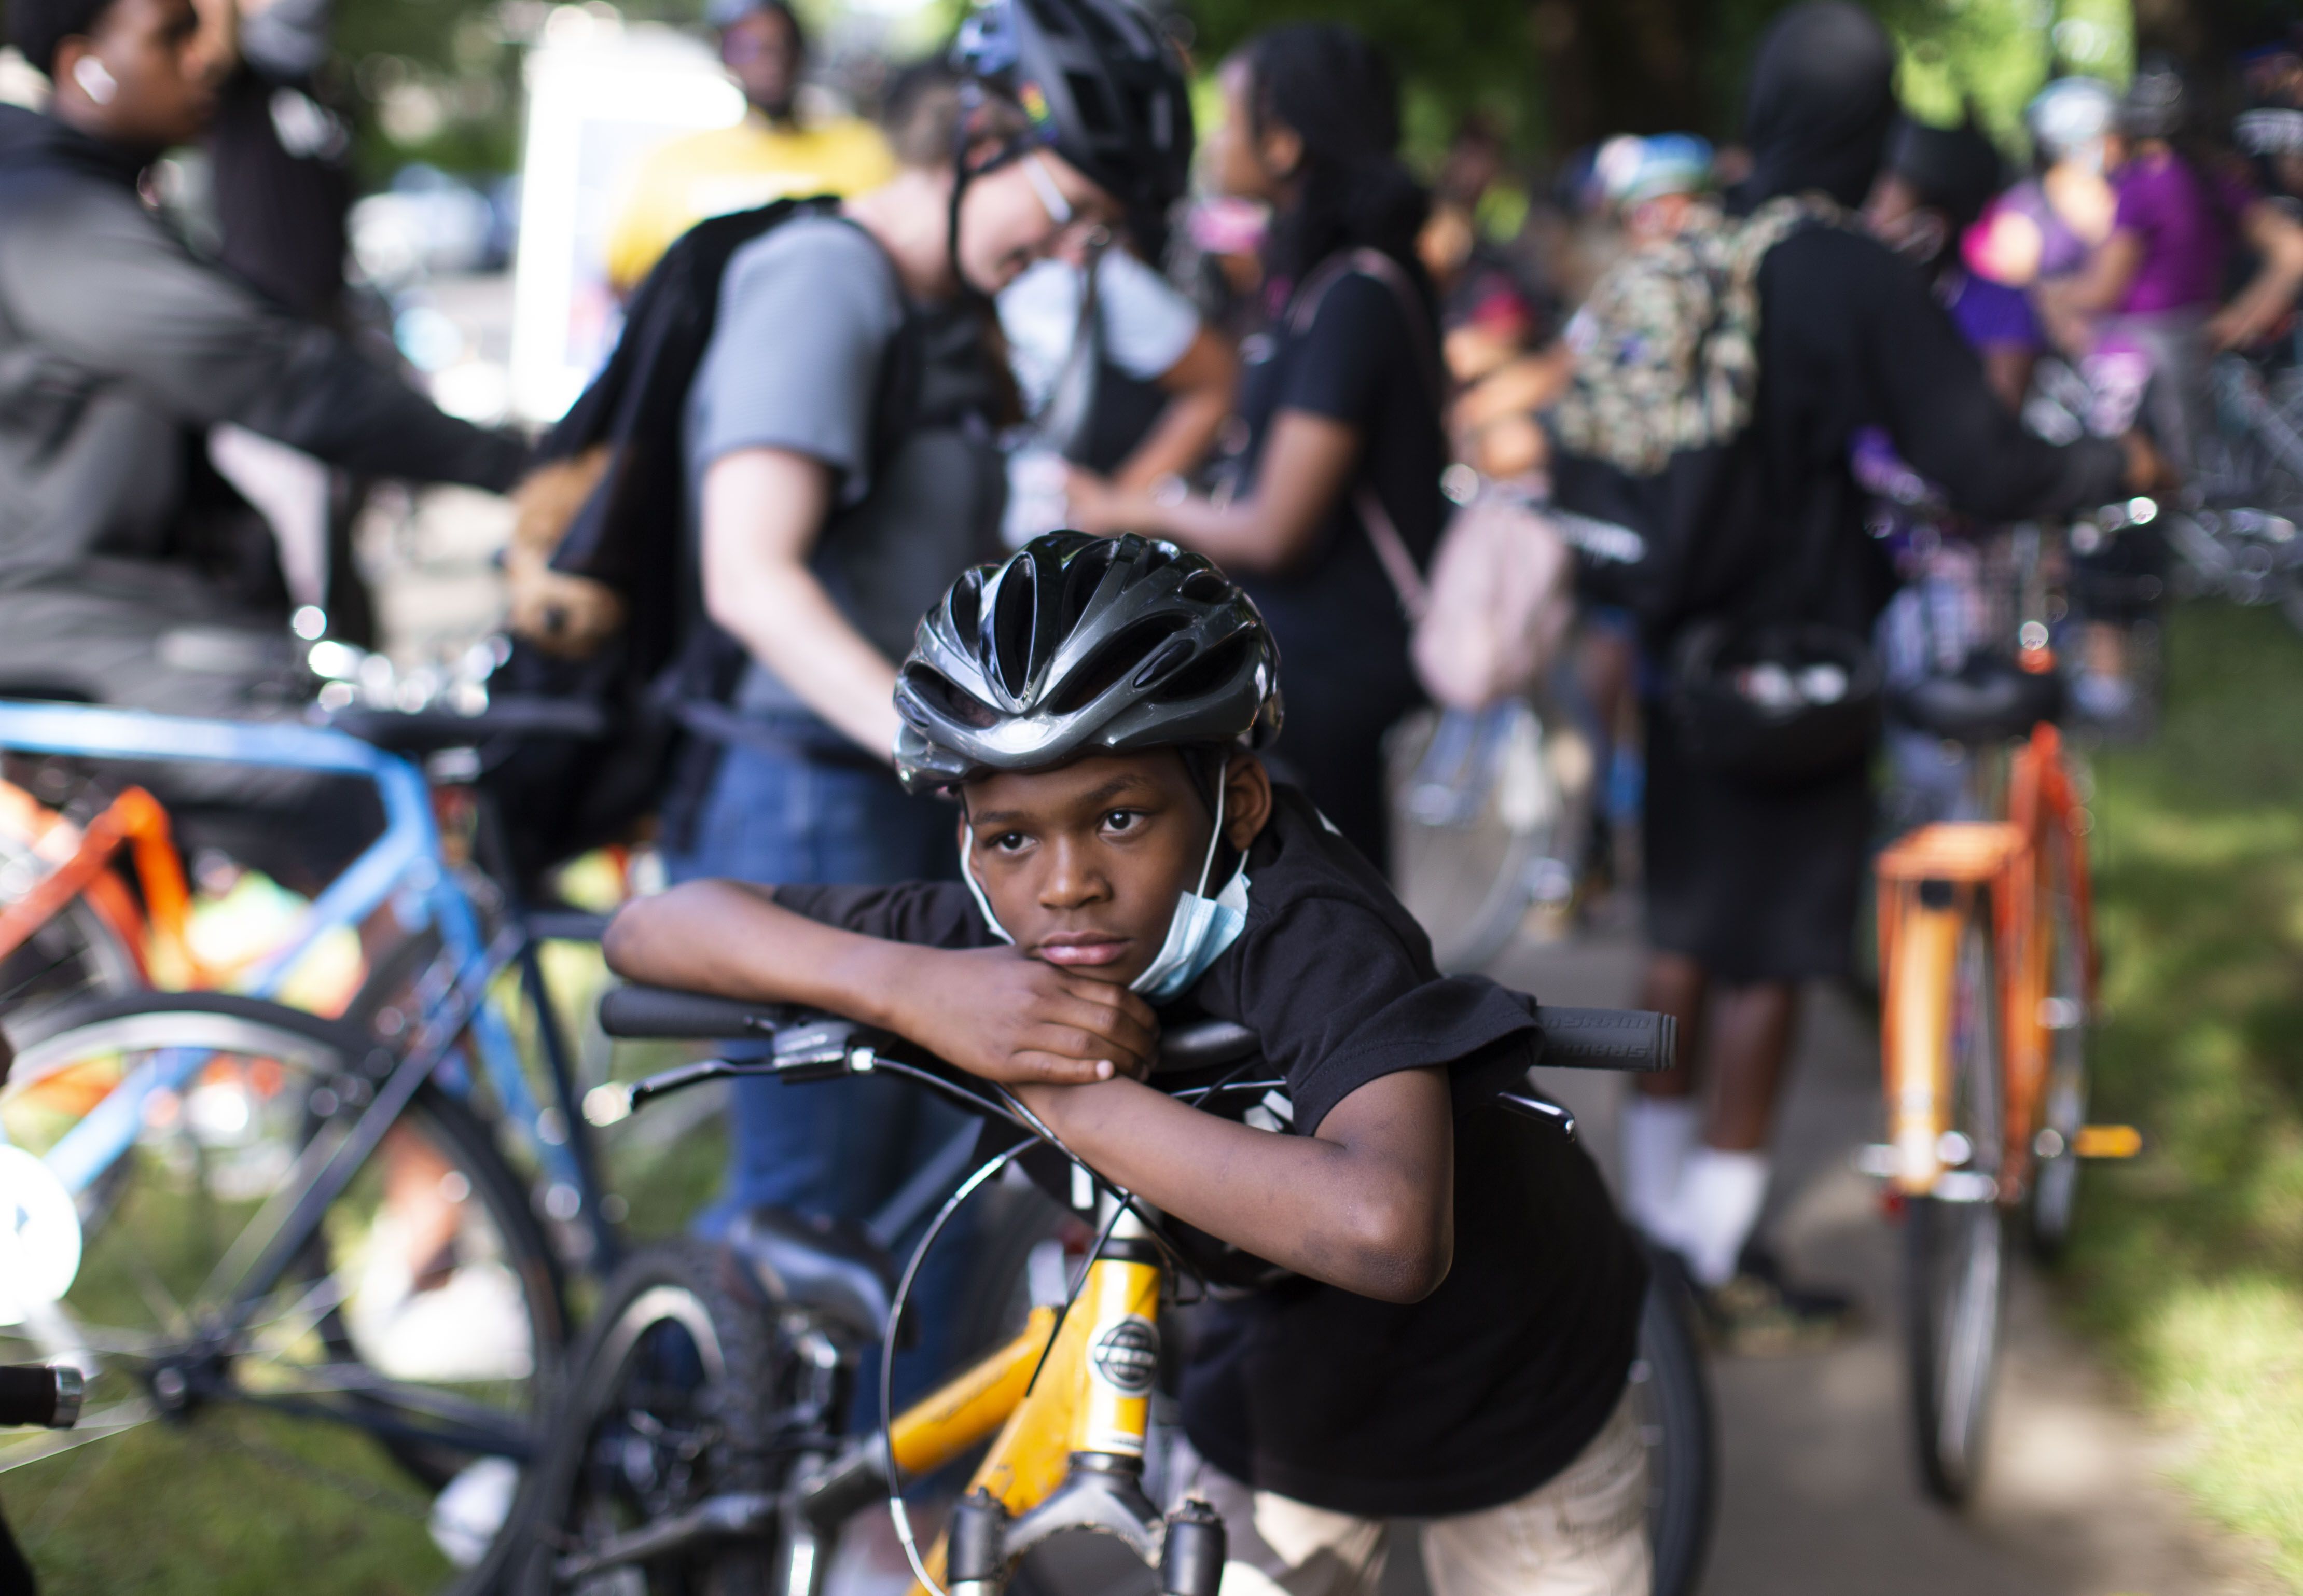 Black Girls Do Bike' Changes The Face Of Cycling In Cleveland